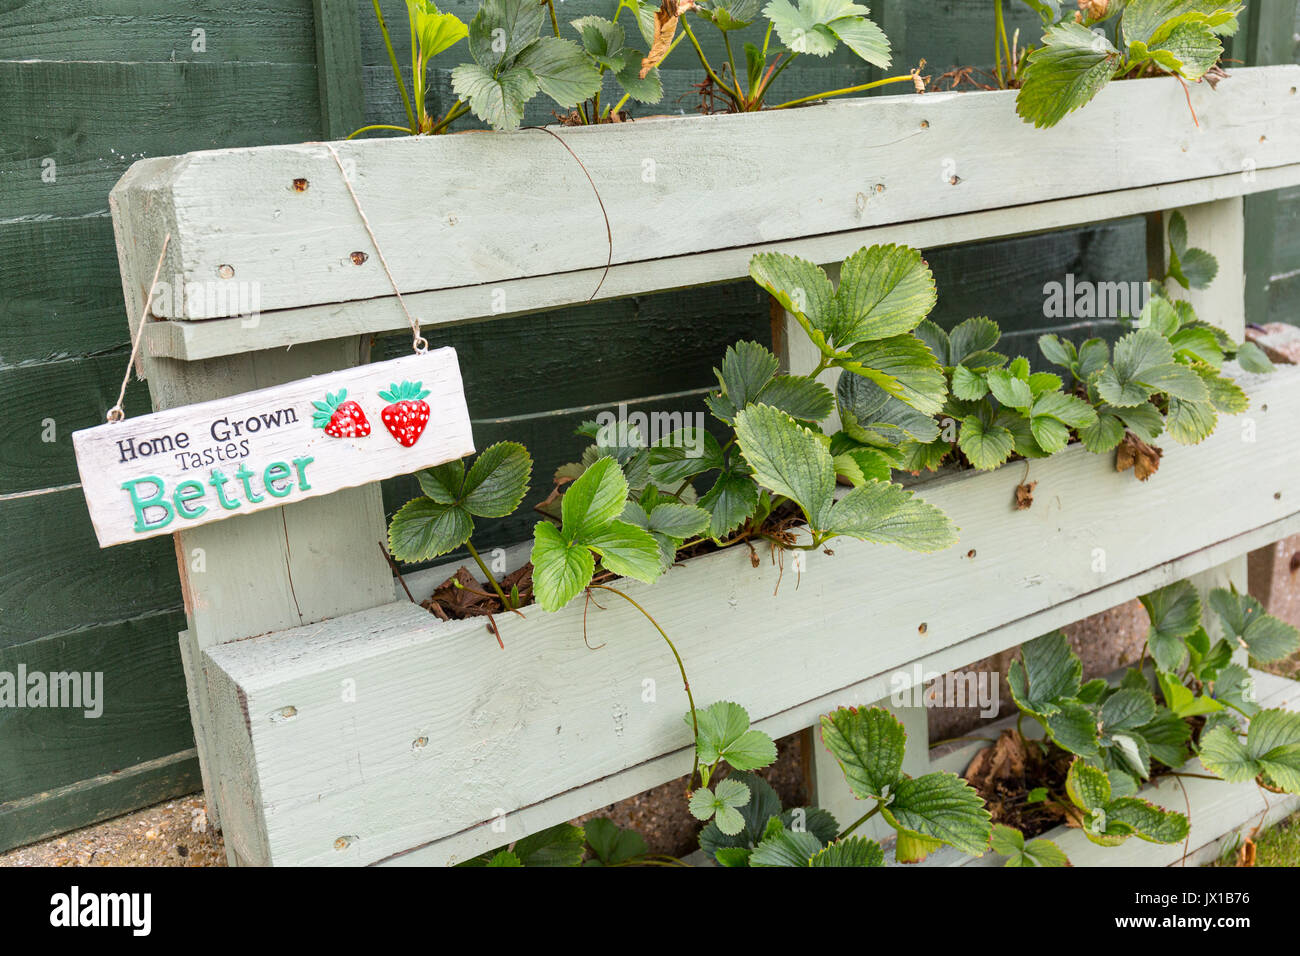 Strawberry Plants growing in a wooden planter made from an old wooden pallet Stock Photo